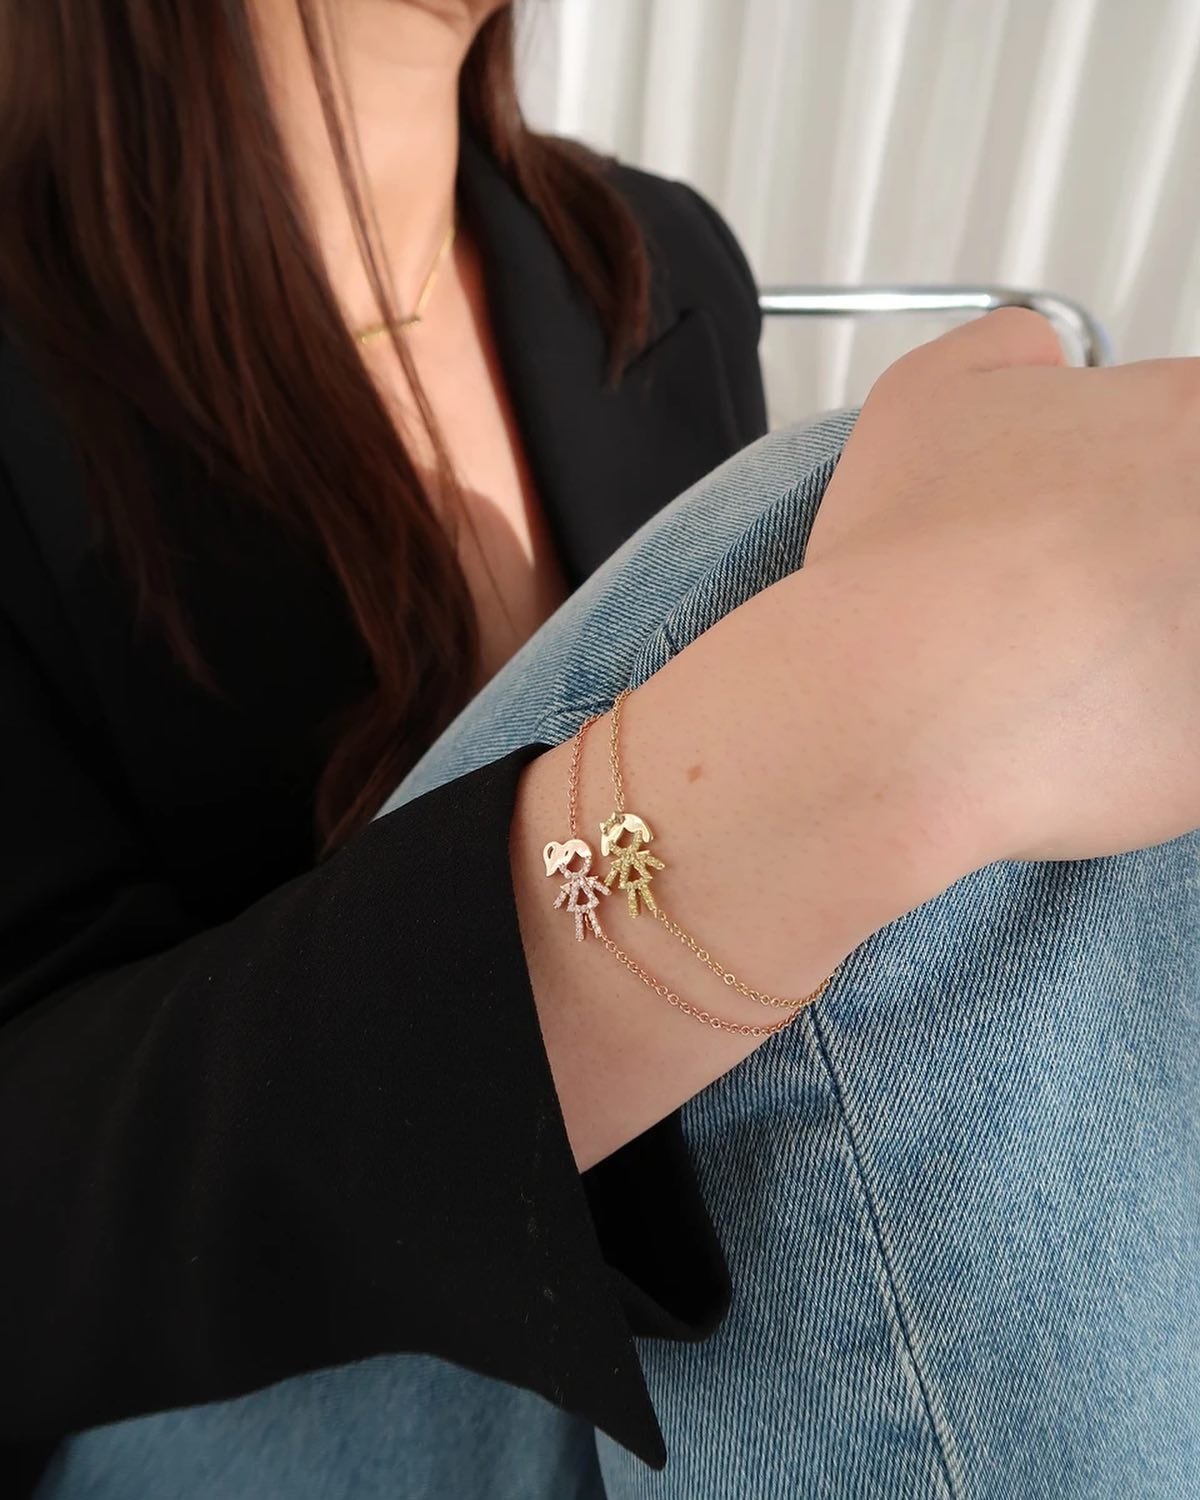 Rose gold or yellow gold? 💛

No matter what you prefer, we have the piece for you.